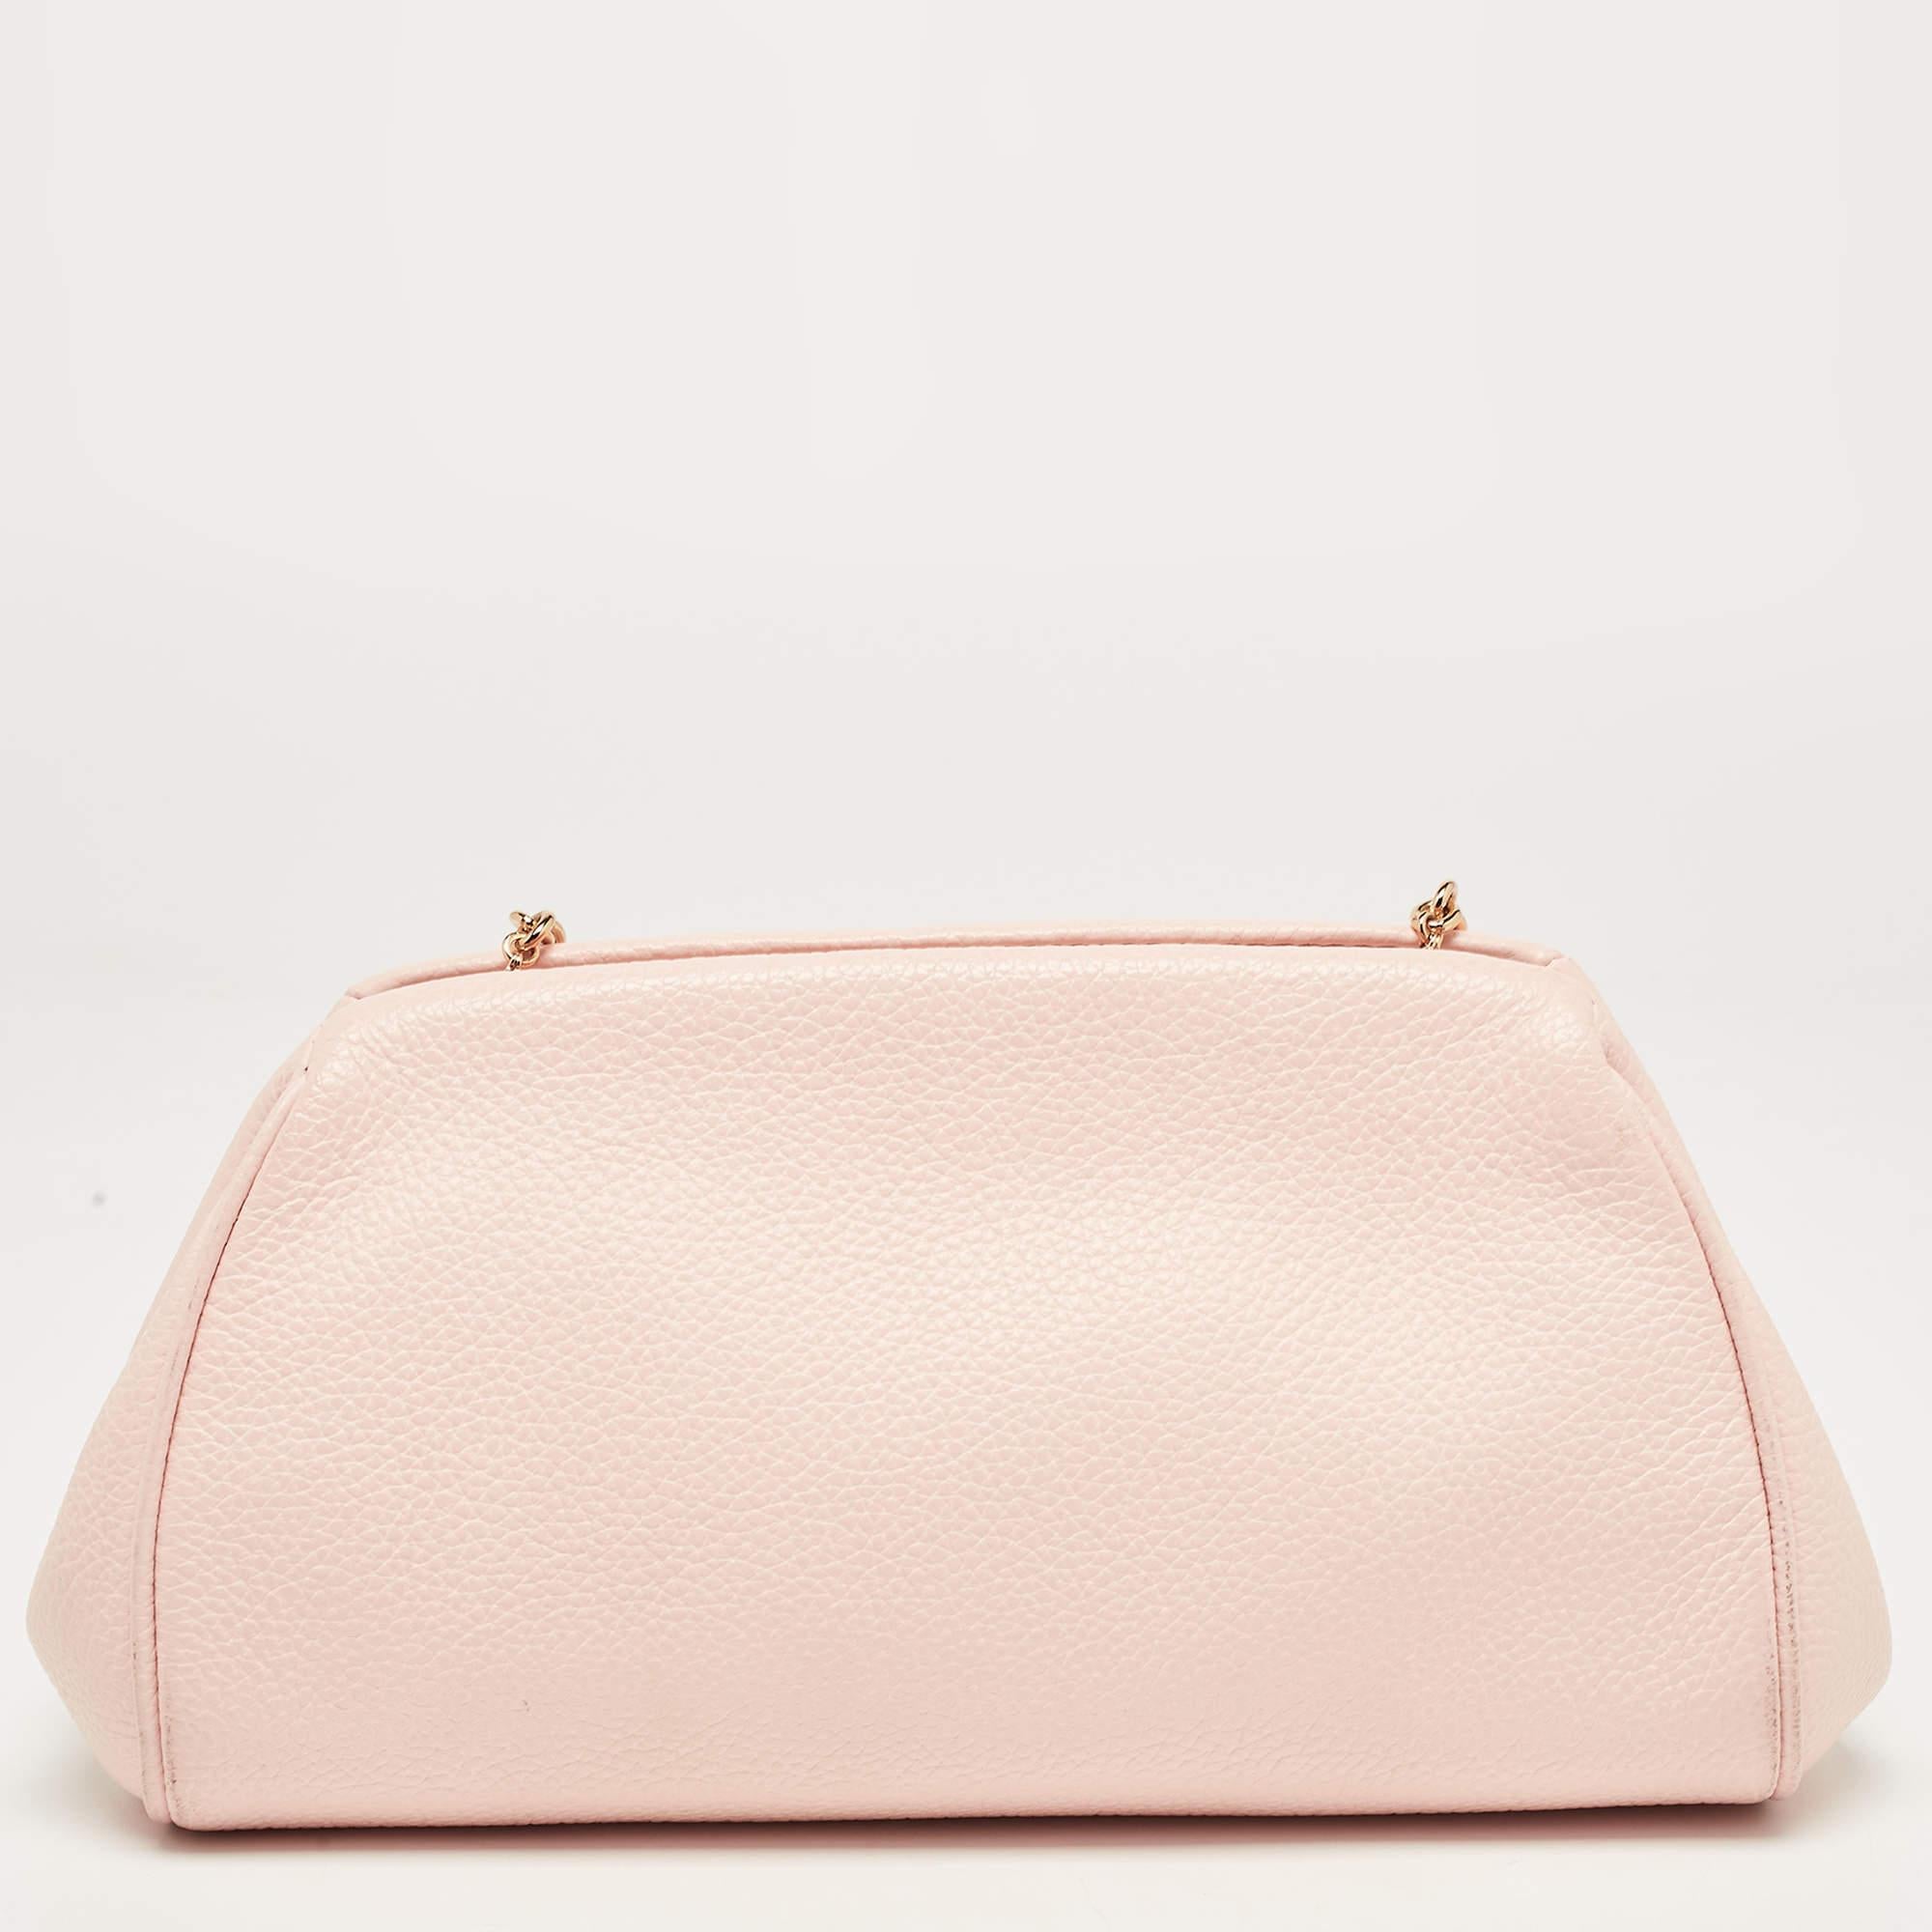 This crossbody bag by Salvatore Ferragamo is a great option for carrying your essentials. This pink leather bag has a compact size and a zipper to secure the interior. Designed to be ideal for everyday use, this crossbody bag is a